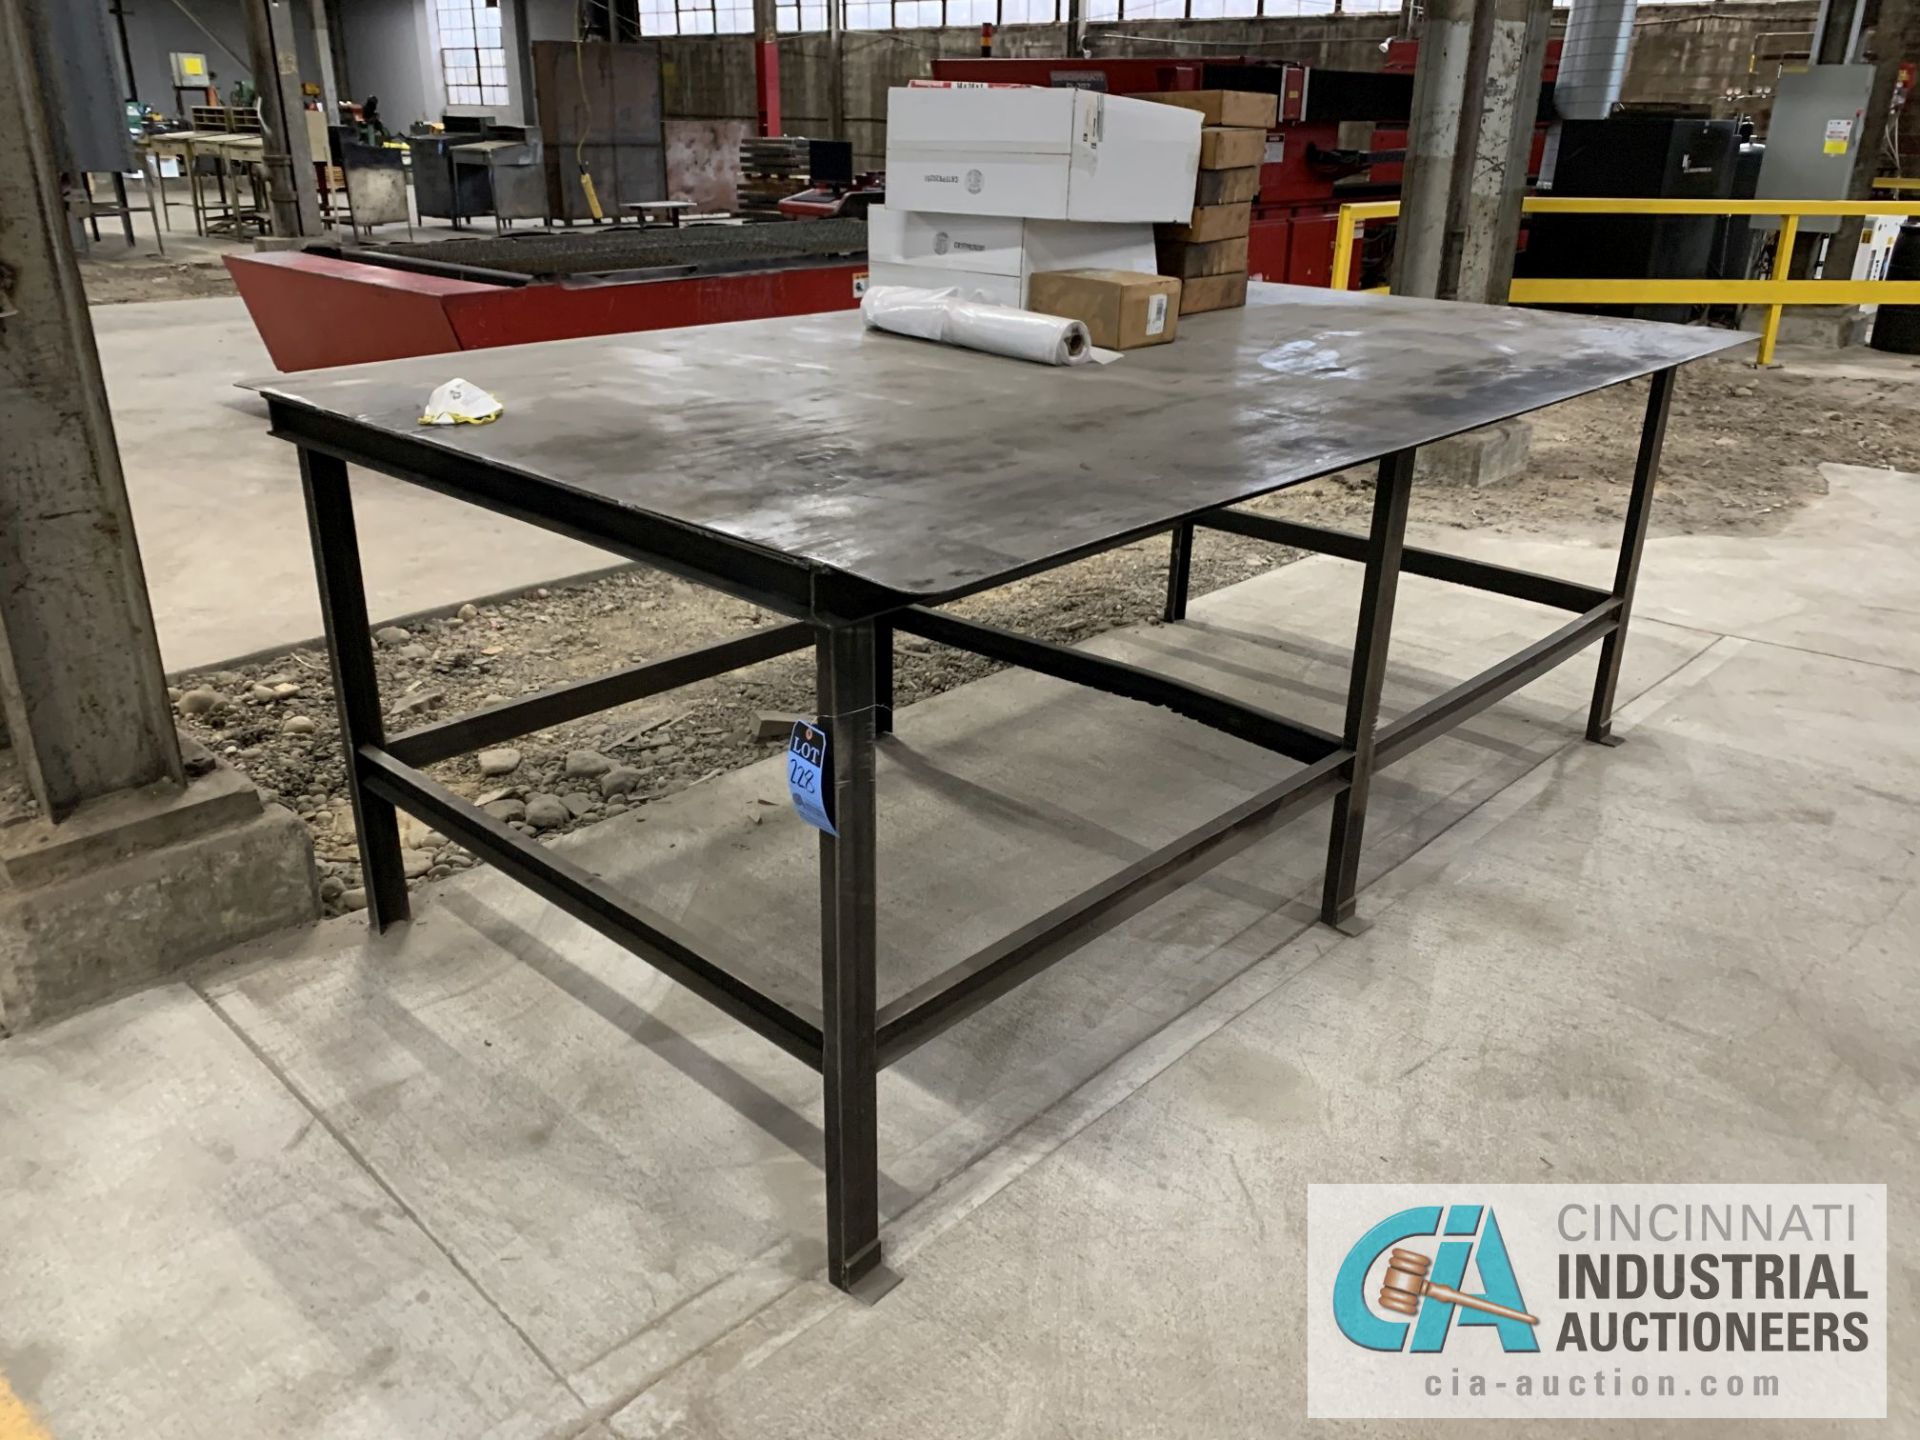 6' X 10' X 45" STEEL LAYOUT TABLE